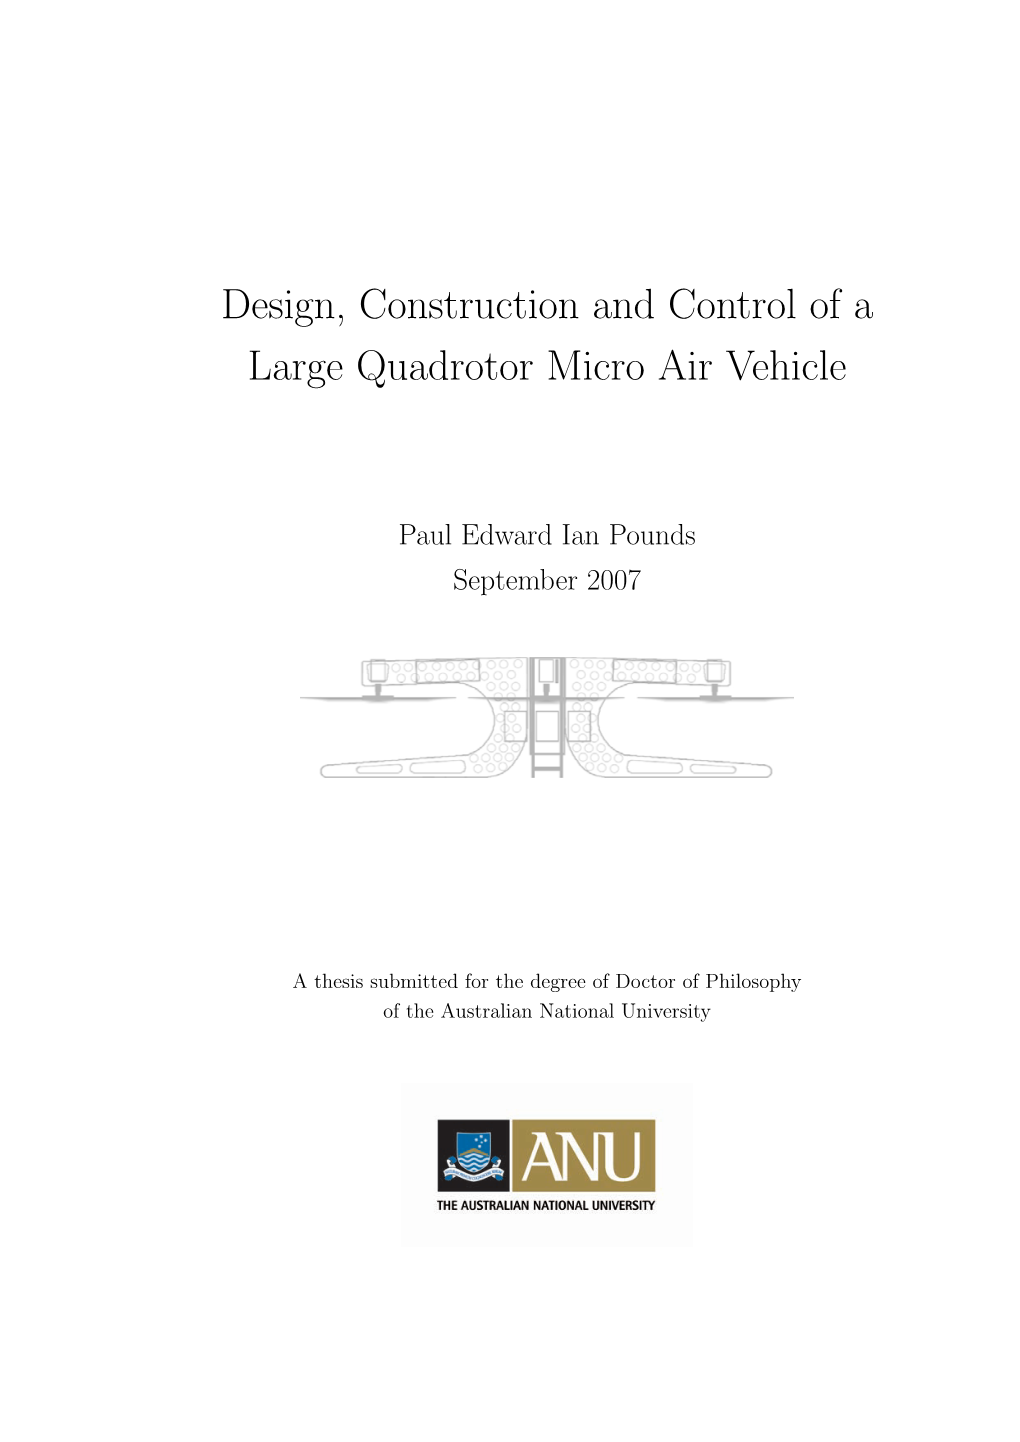 Design, Construction and Control of a Large Quadrotor Micro Air Vehicle